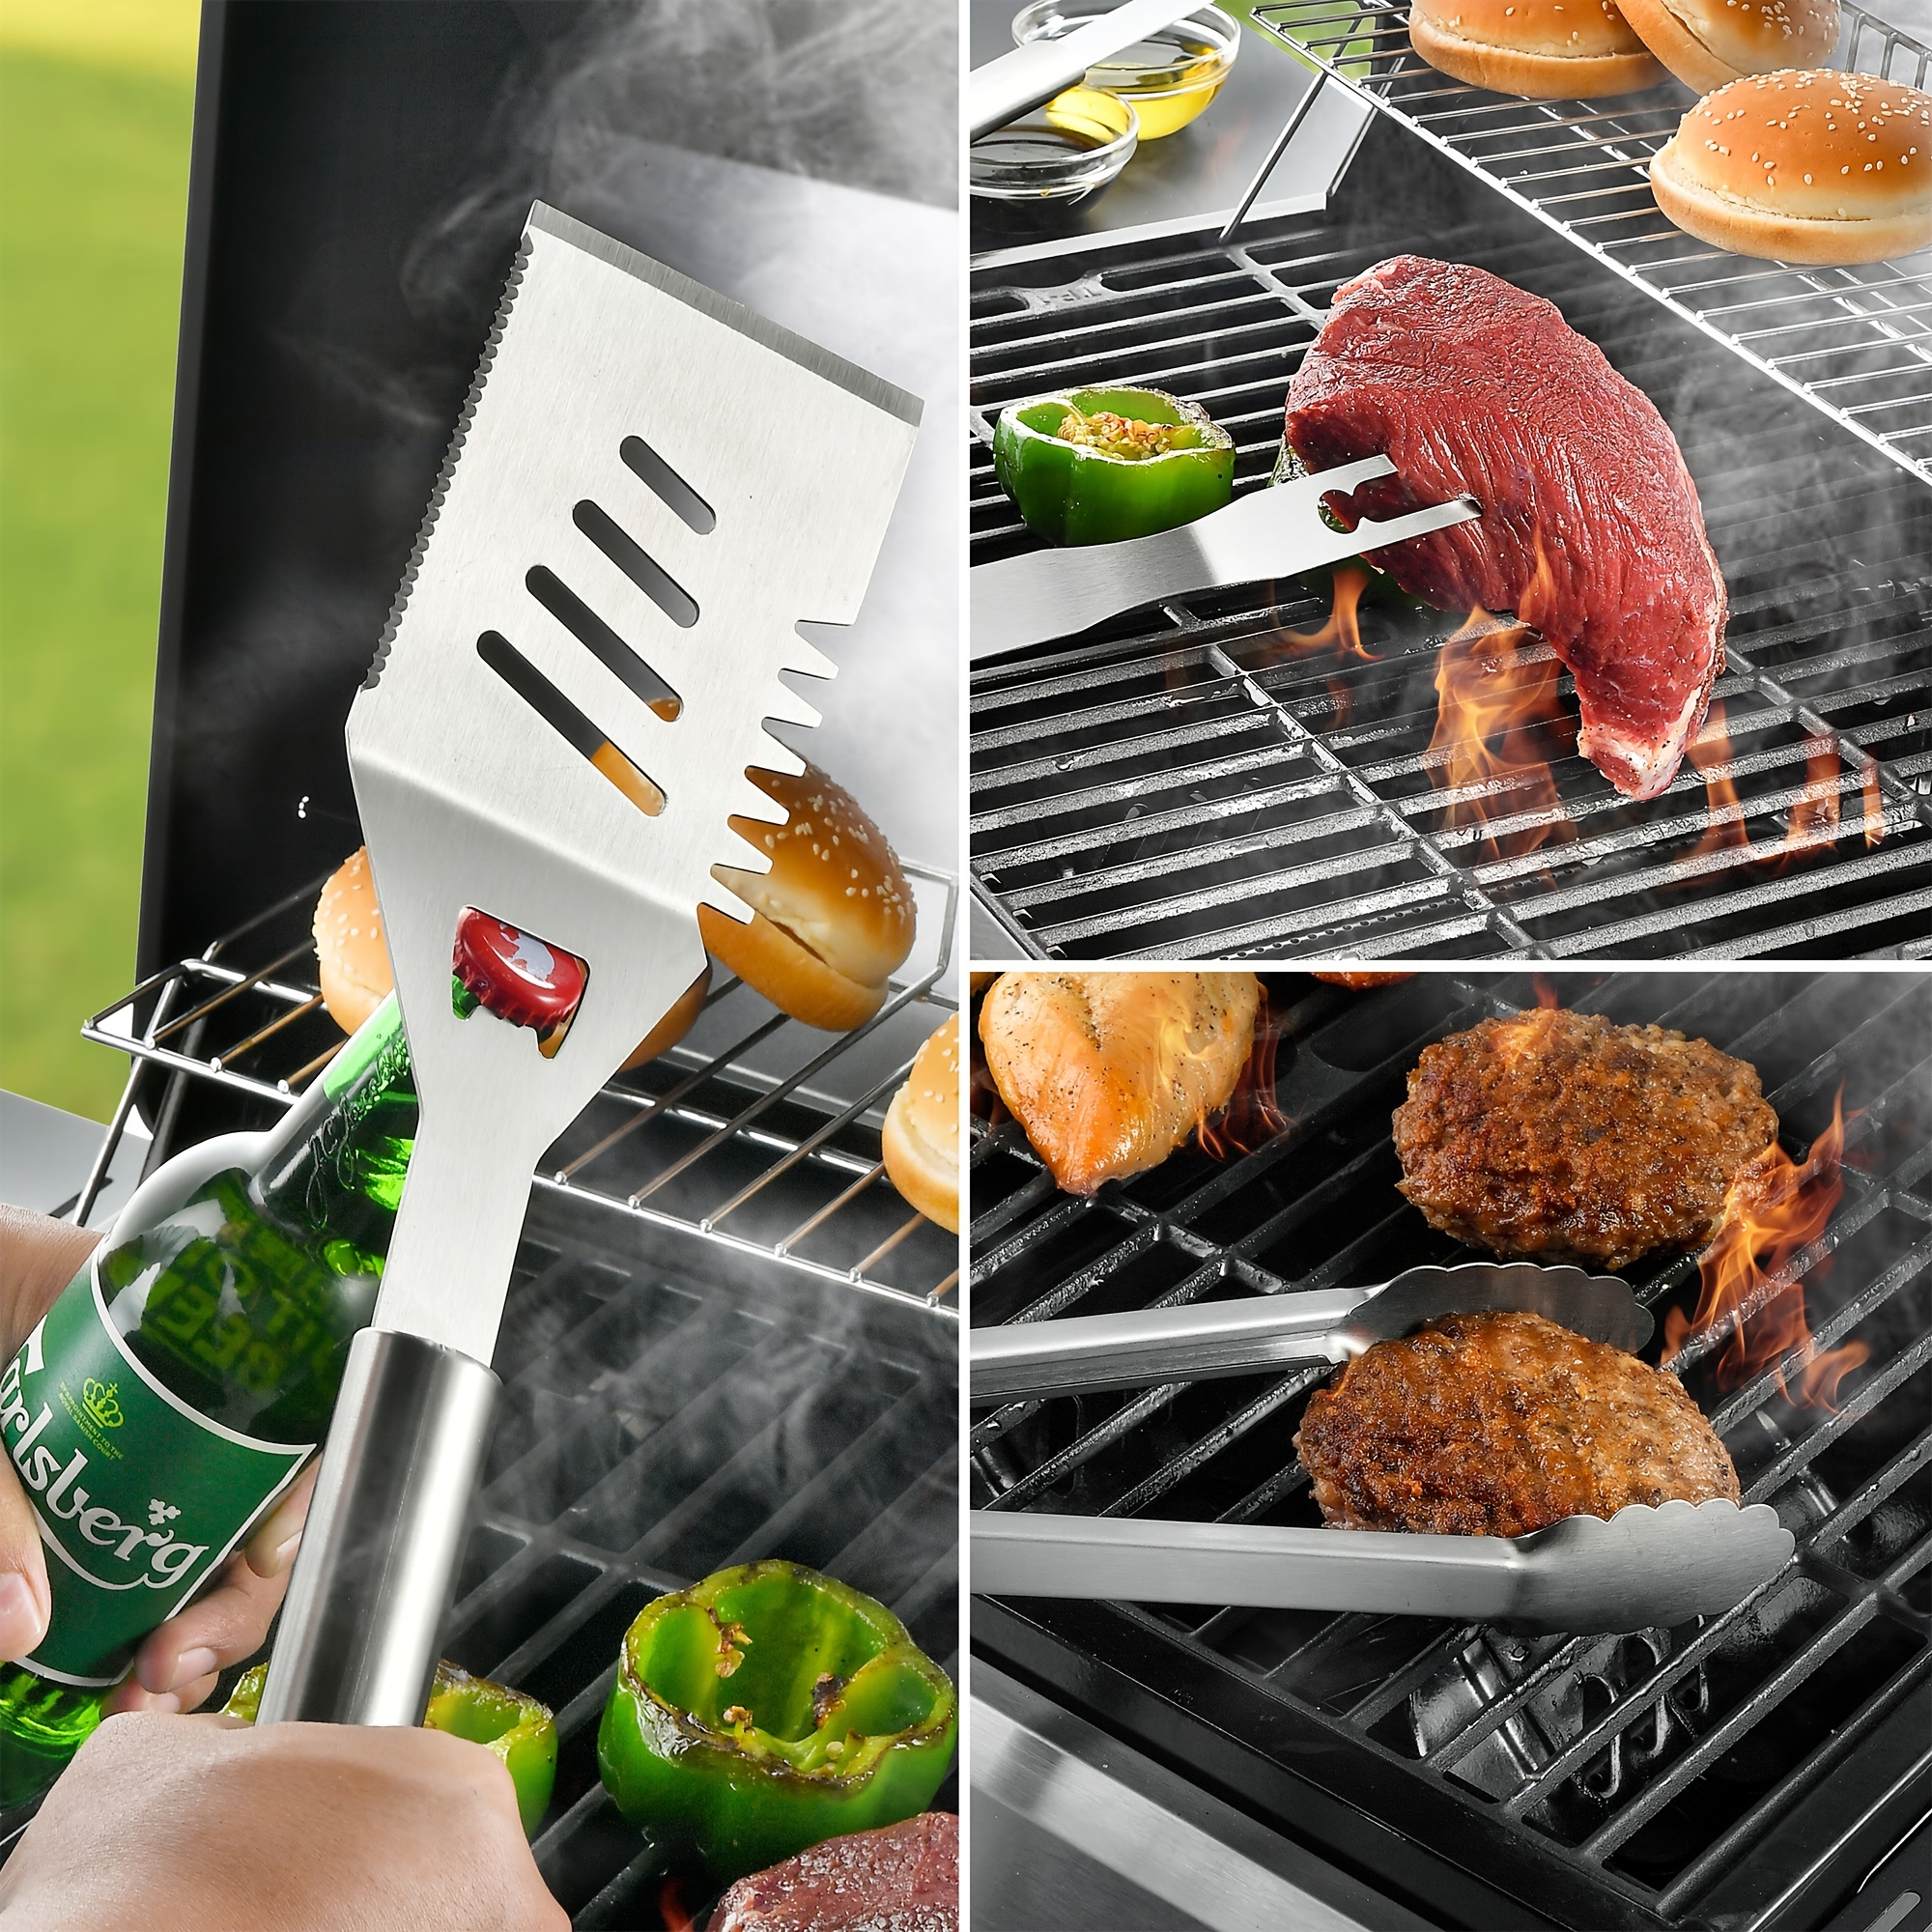 Grill Tools Set - Bbq Grill Utensils - Barbecue Grill Accessories